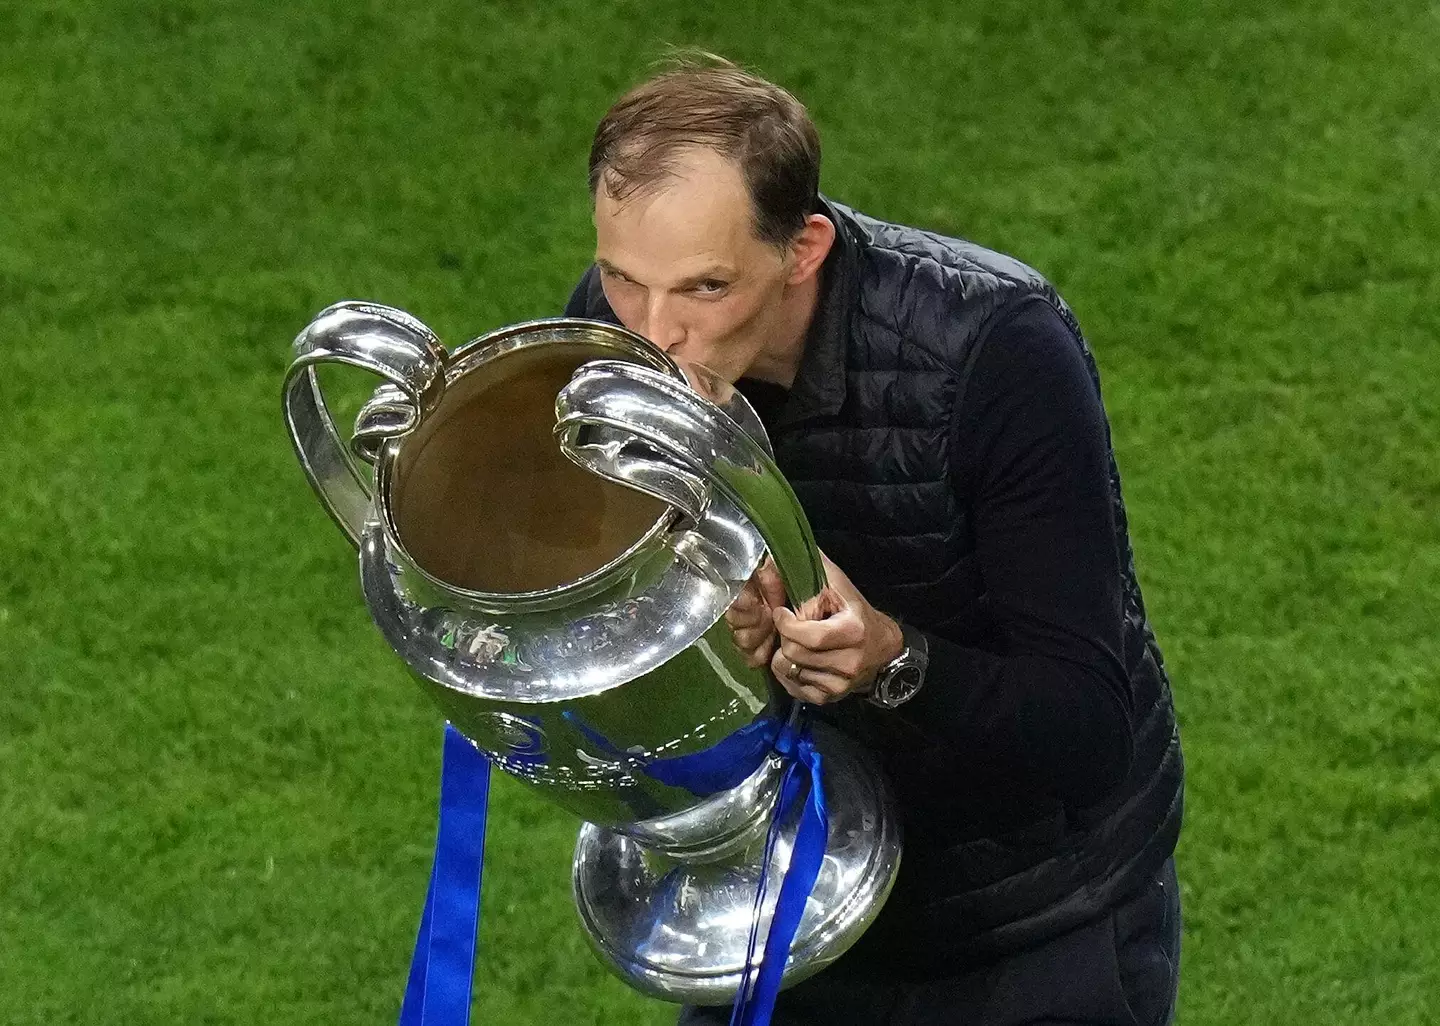 Tuchel in happier times, with the Champions League trophy. Image: Alamy